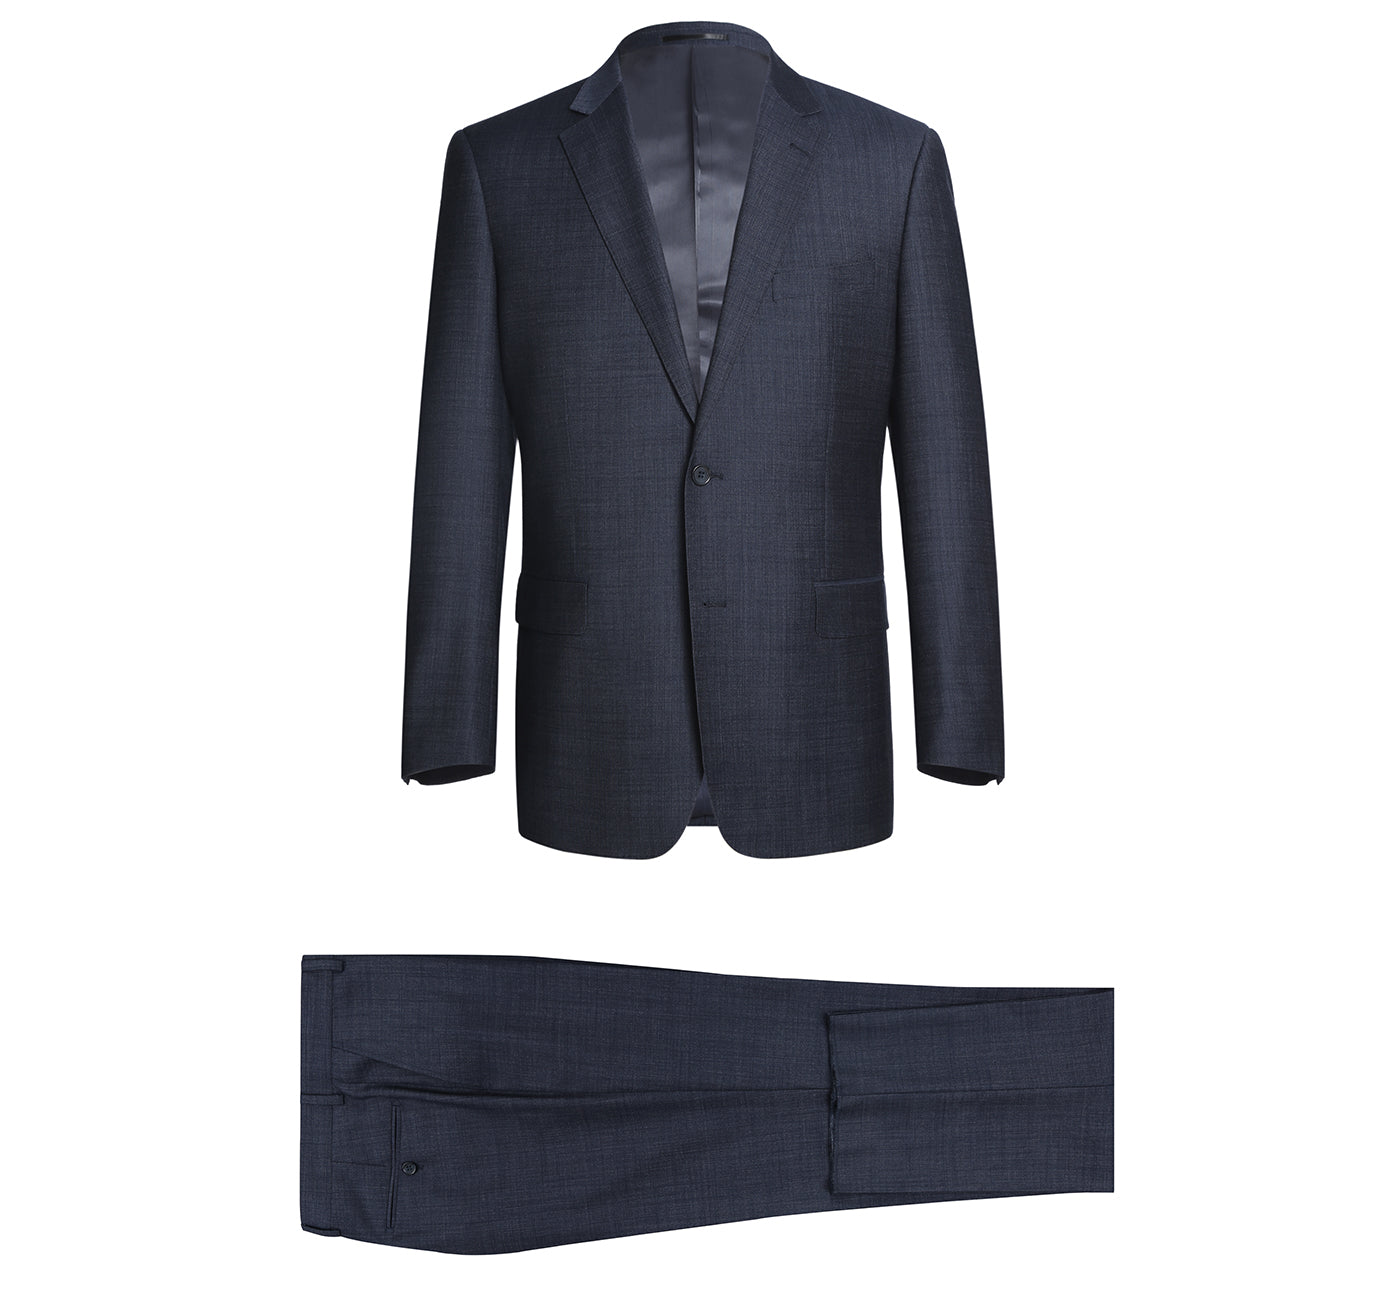 558-3 Men's Two Piece Classic Fit Navy Textured Wool Blend Suit